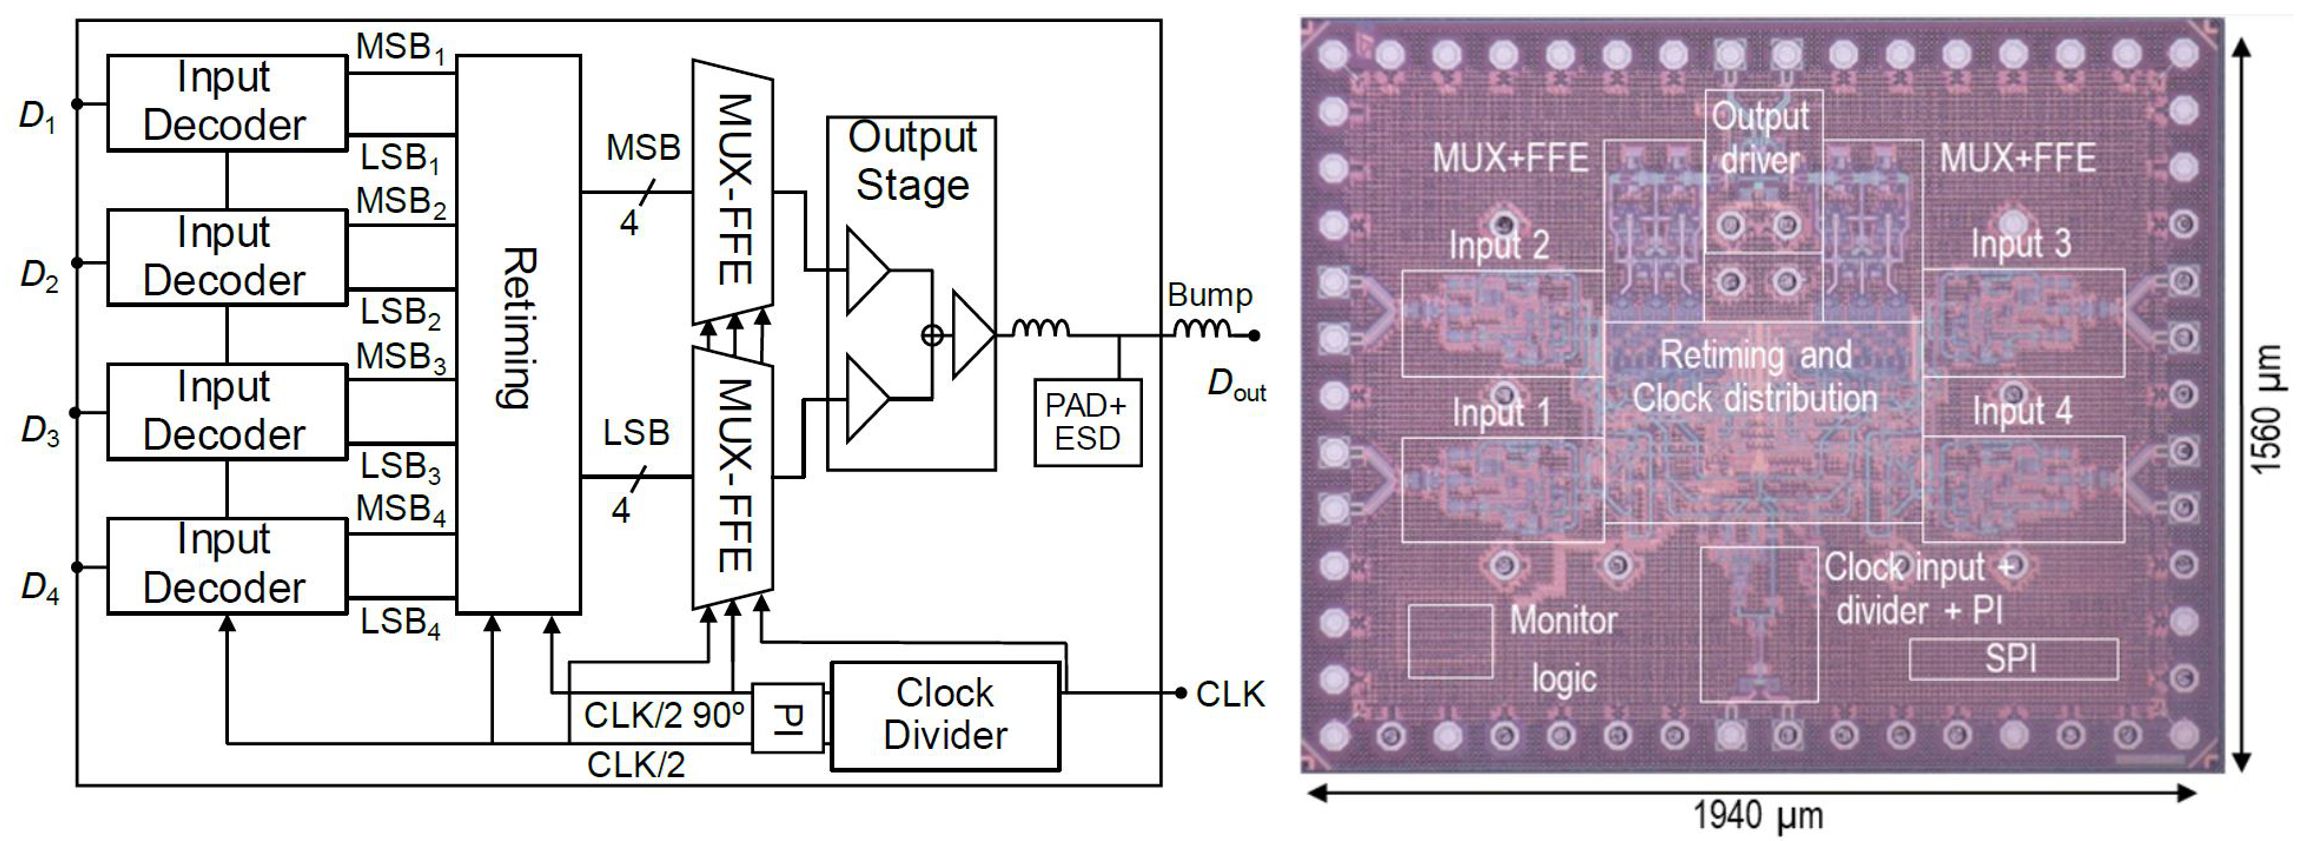 (Left) Block diagram and (right) die micrography of the 4:1 PAM-4 serializer chip with mixed-signal FFE, as presented at 2021 CICC. 